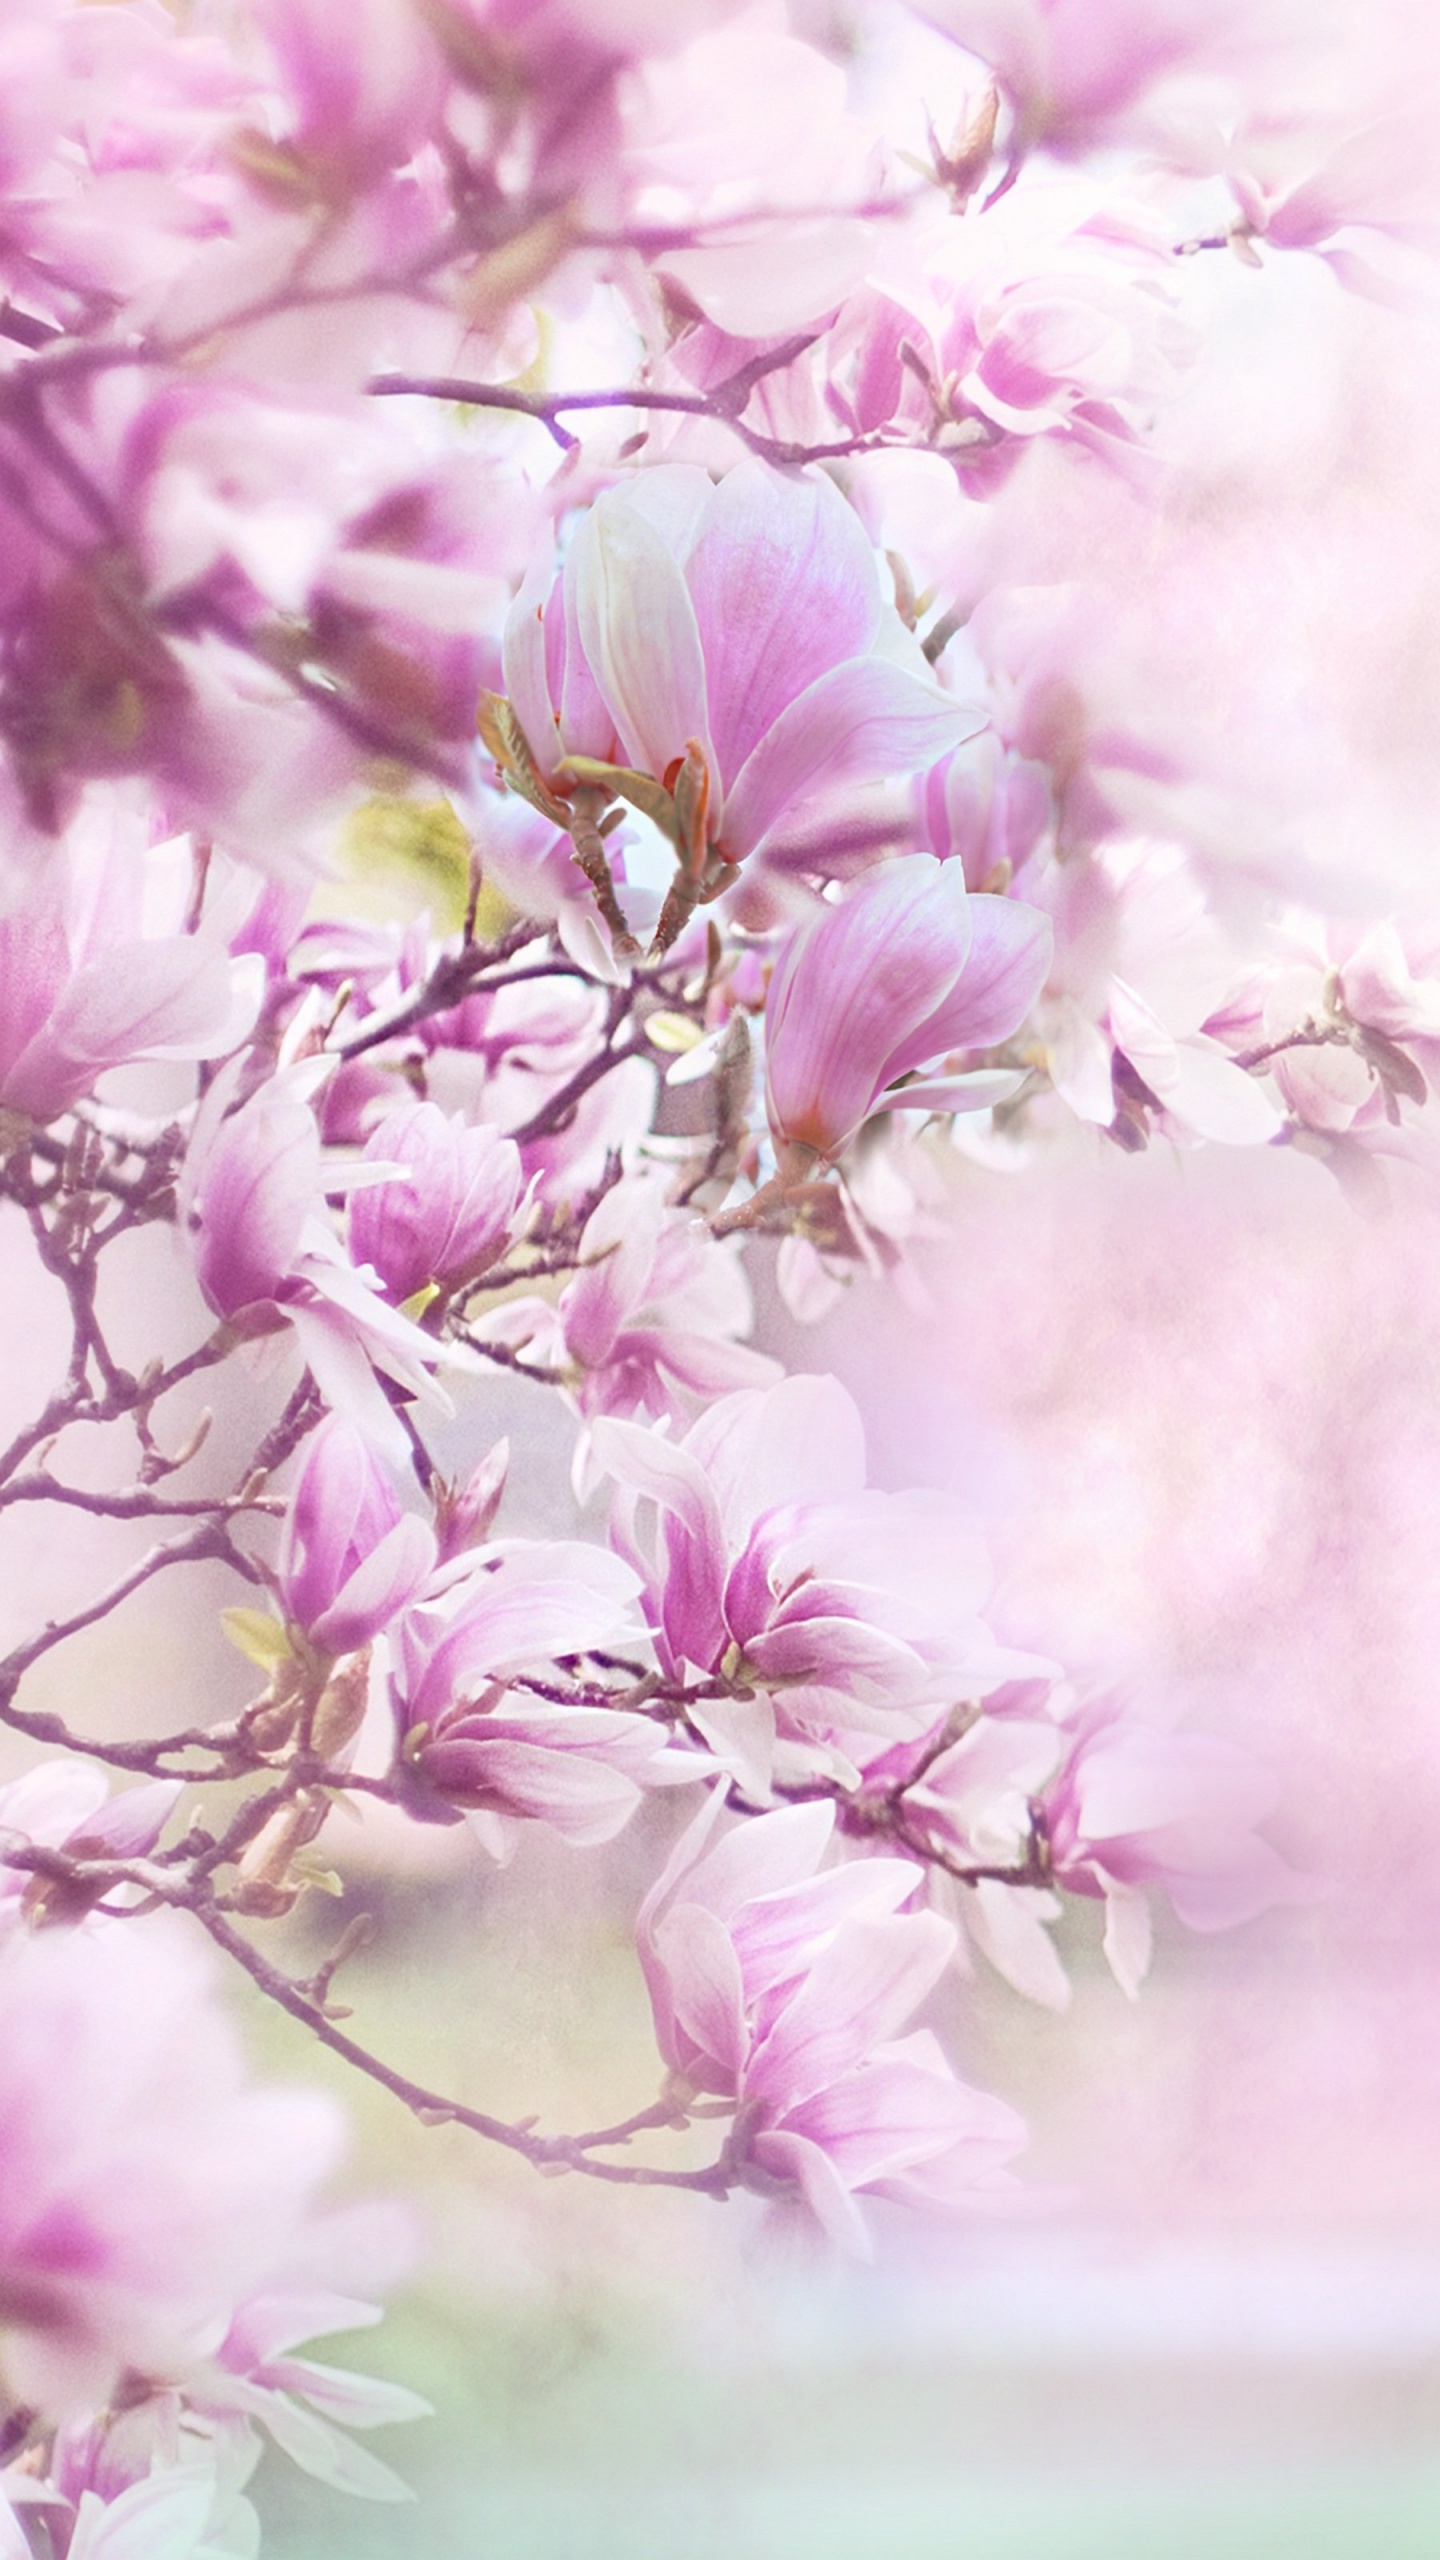 magnolia-flowers-blossom-pink-background